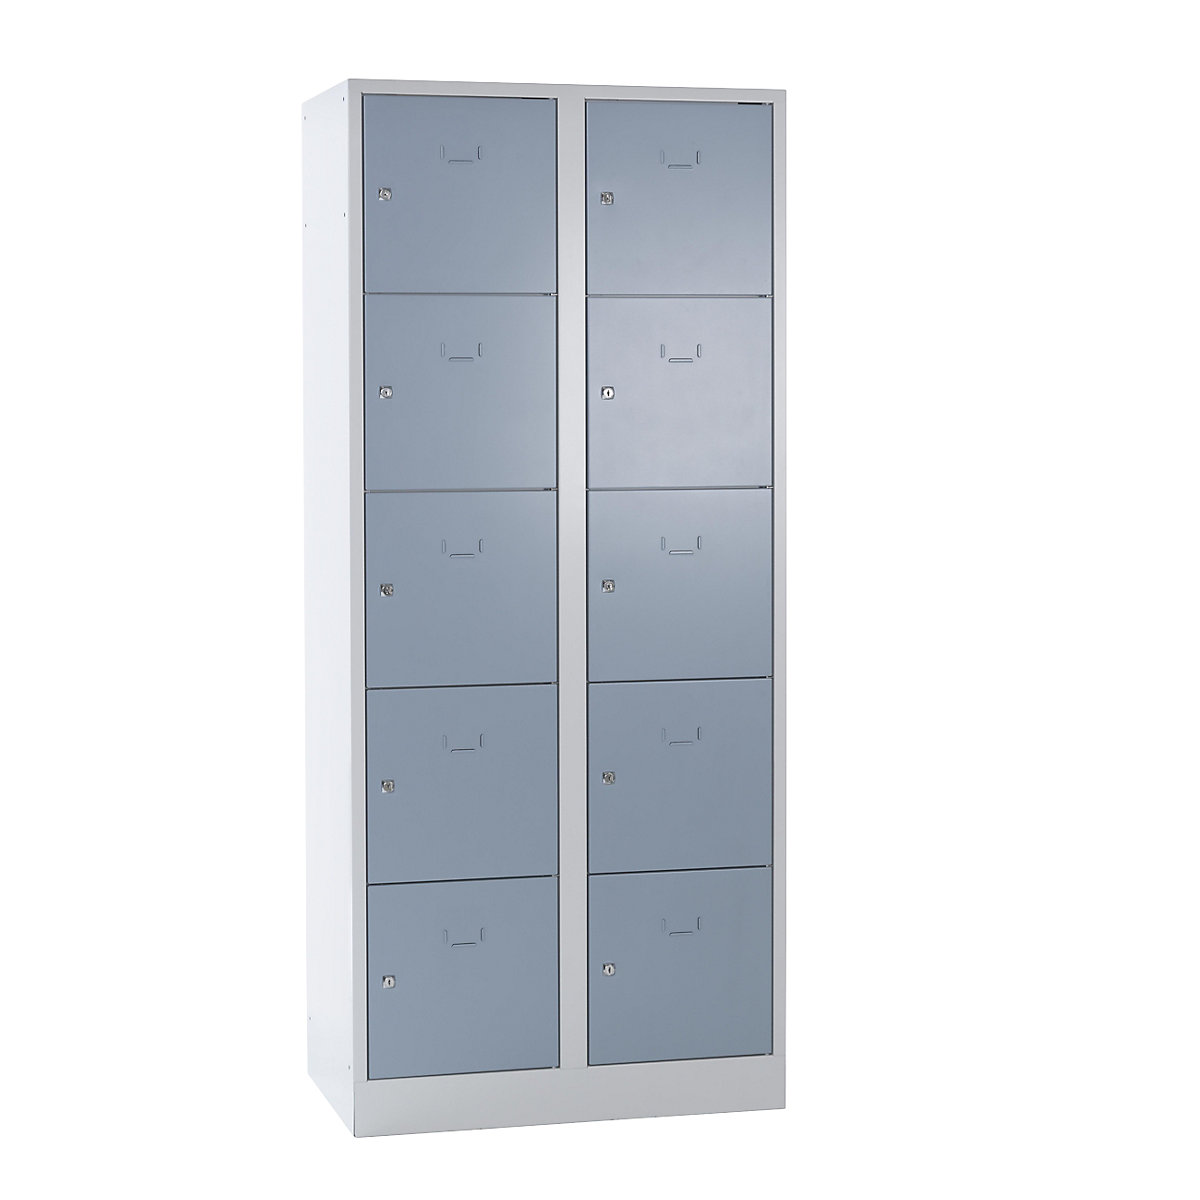 Cloakroom locker system – Wolf, 10 compartments, compartment width 400 mm, silver grey / light grey-5